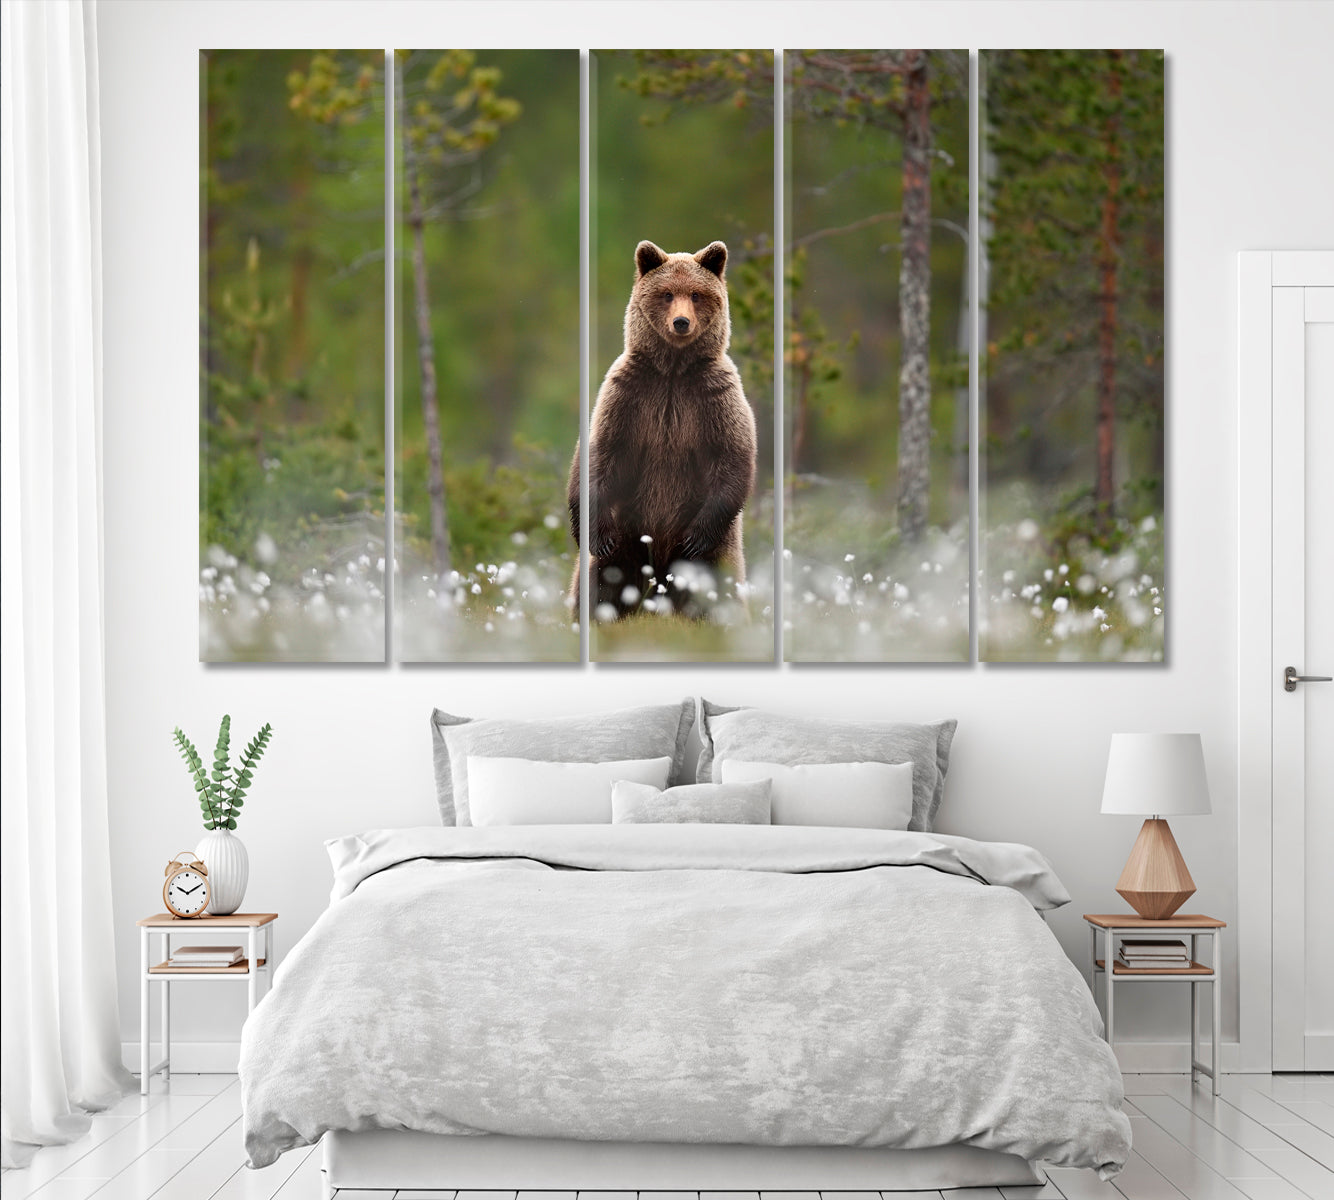 Brown Bear in Taiga Forest Canvas Print ArtLexy 5 Panels 36"x24" inches 